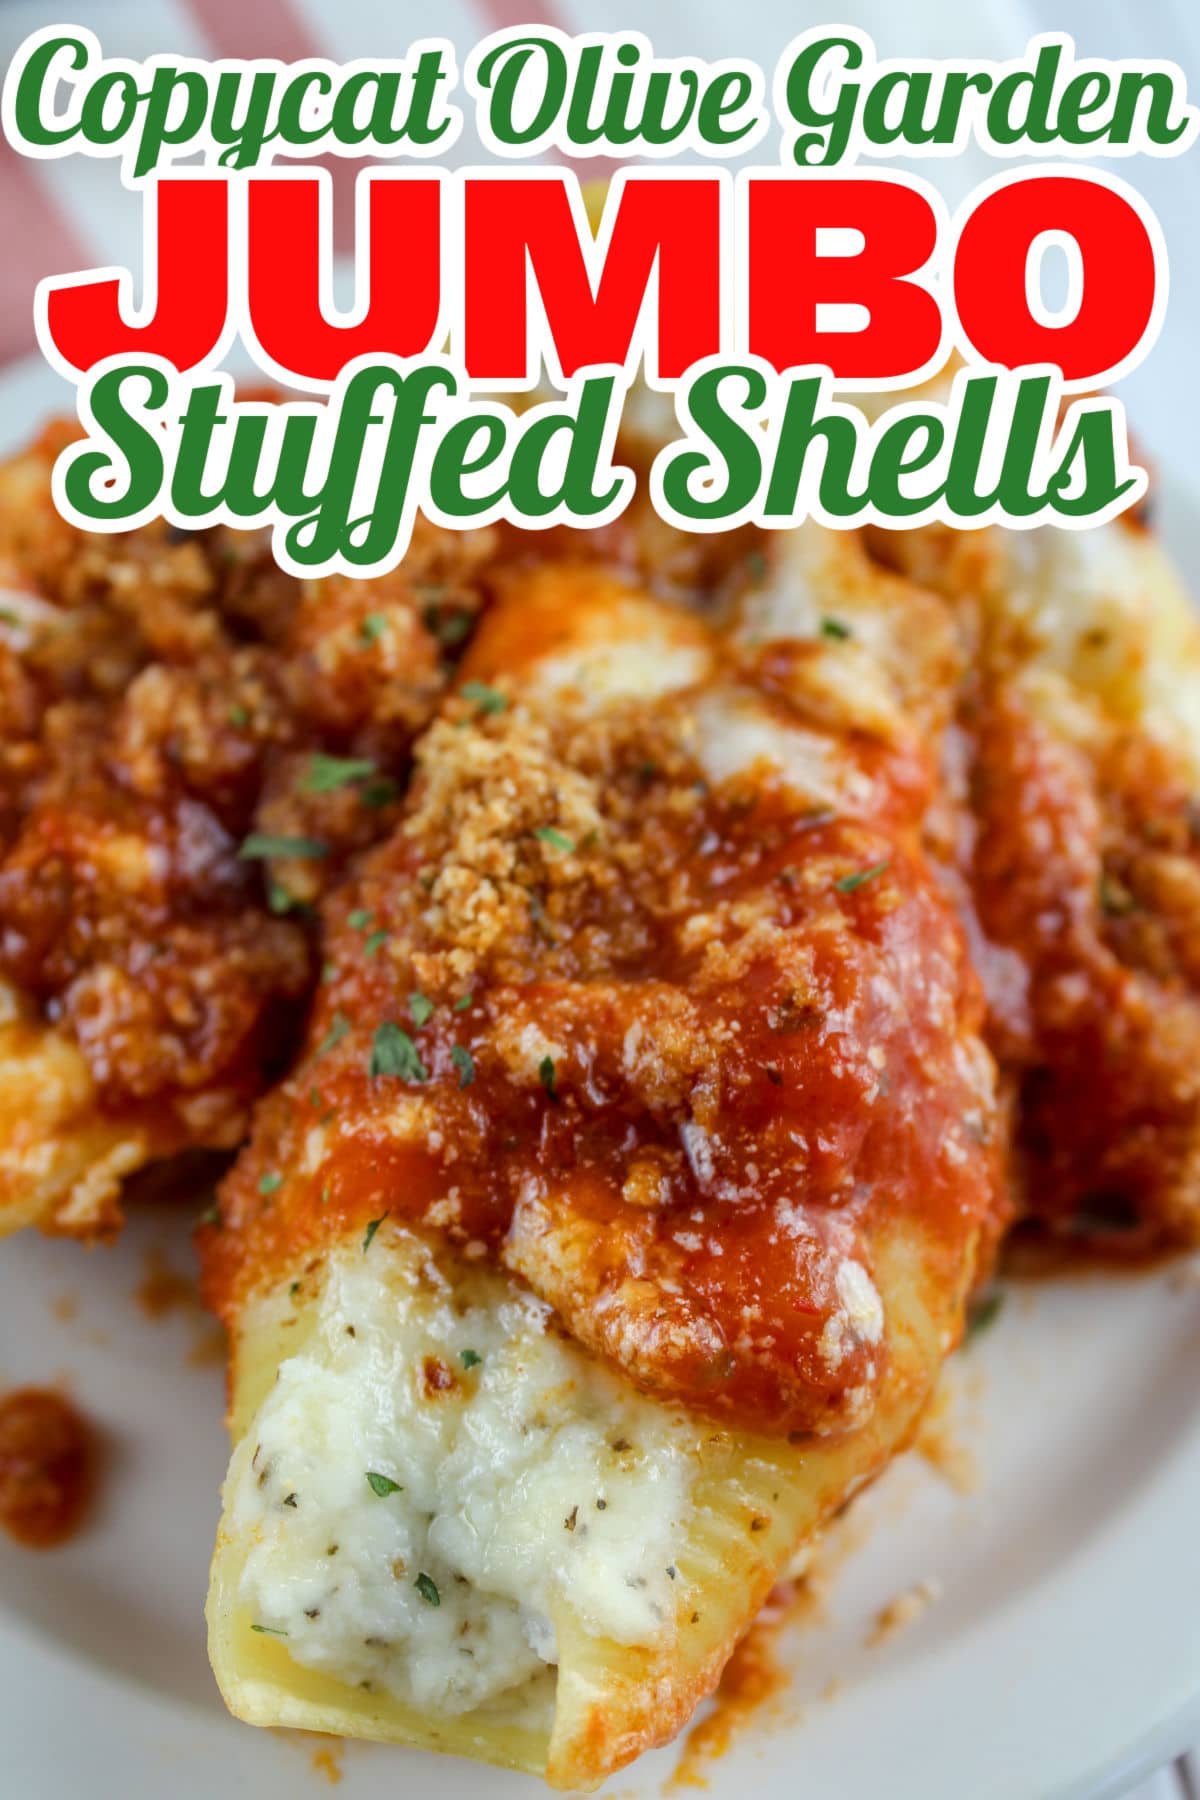 Olive Garden Stuffed Shells are one of their most popular dishes and one of my most popular recipes! They're cheesy, saucy and delicious - plus - easy to make!  via @foodhussy